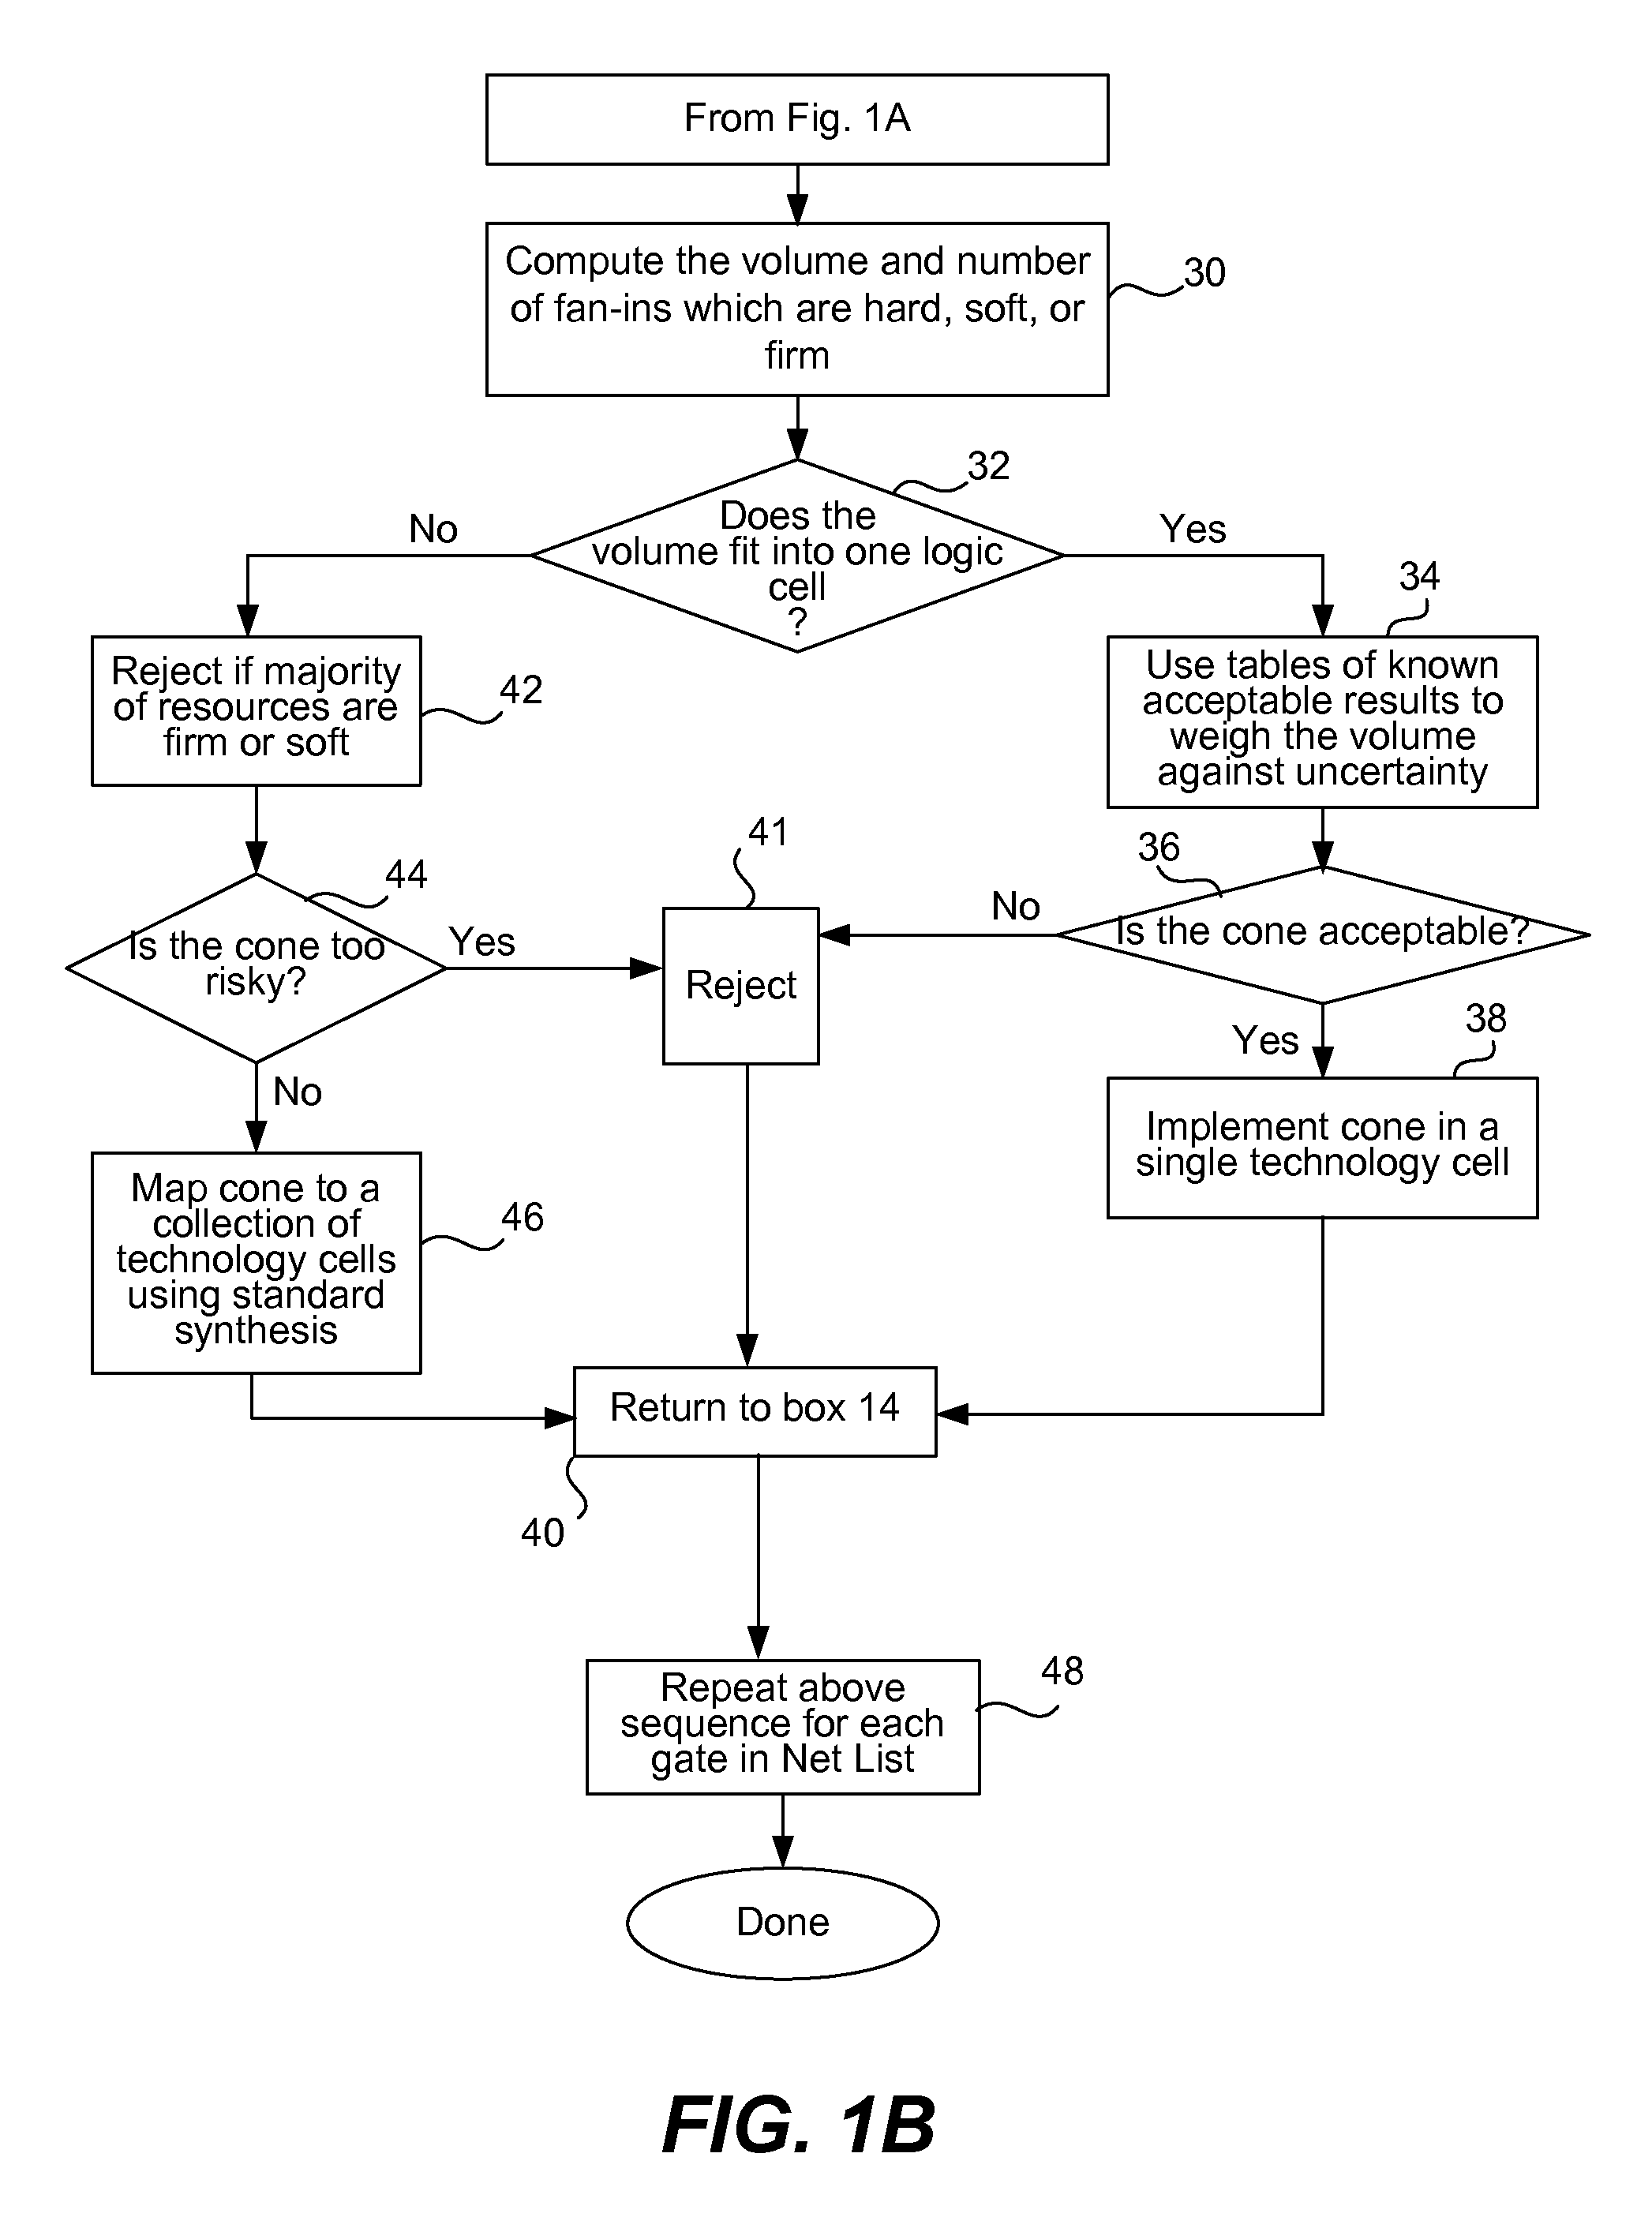 Early logic mapper during FPGA synthesis